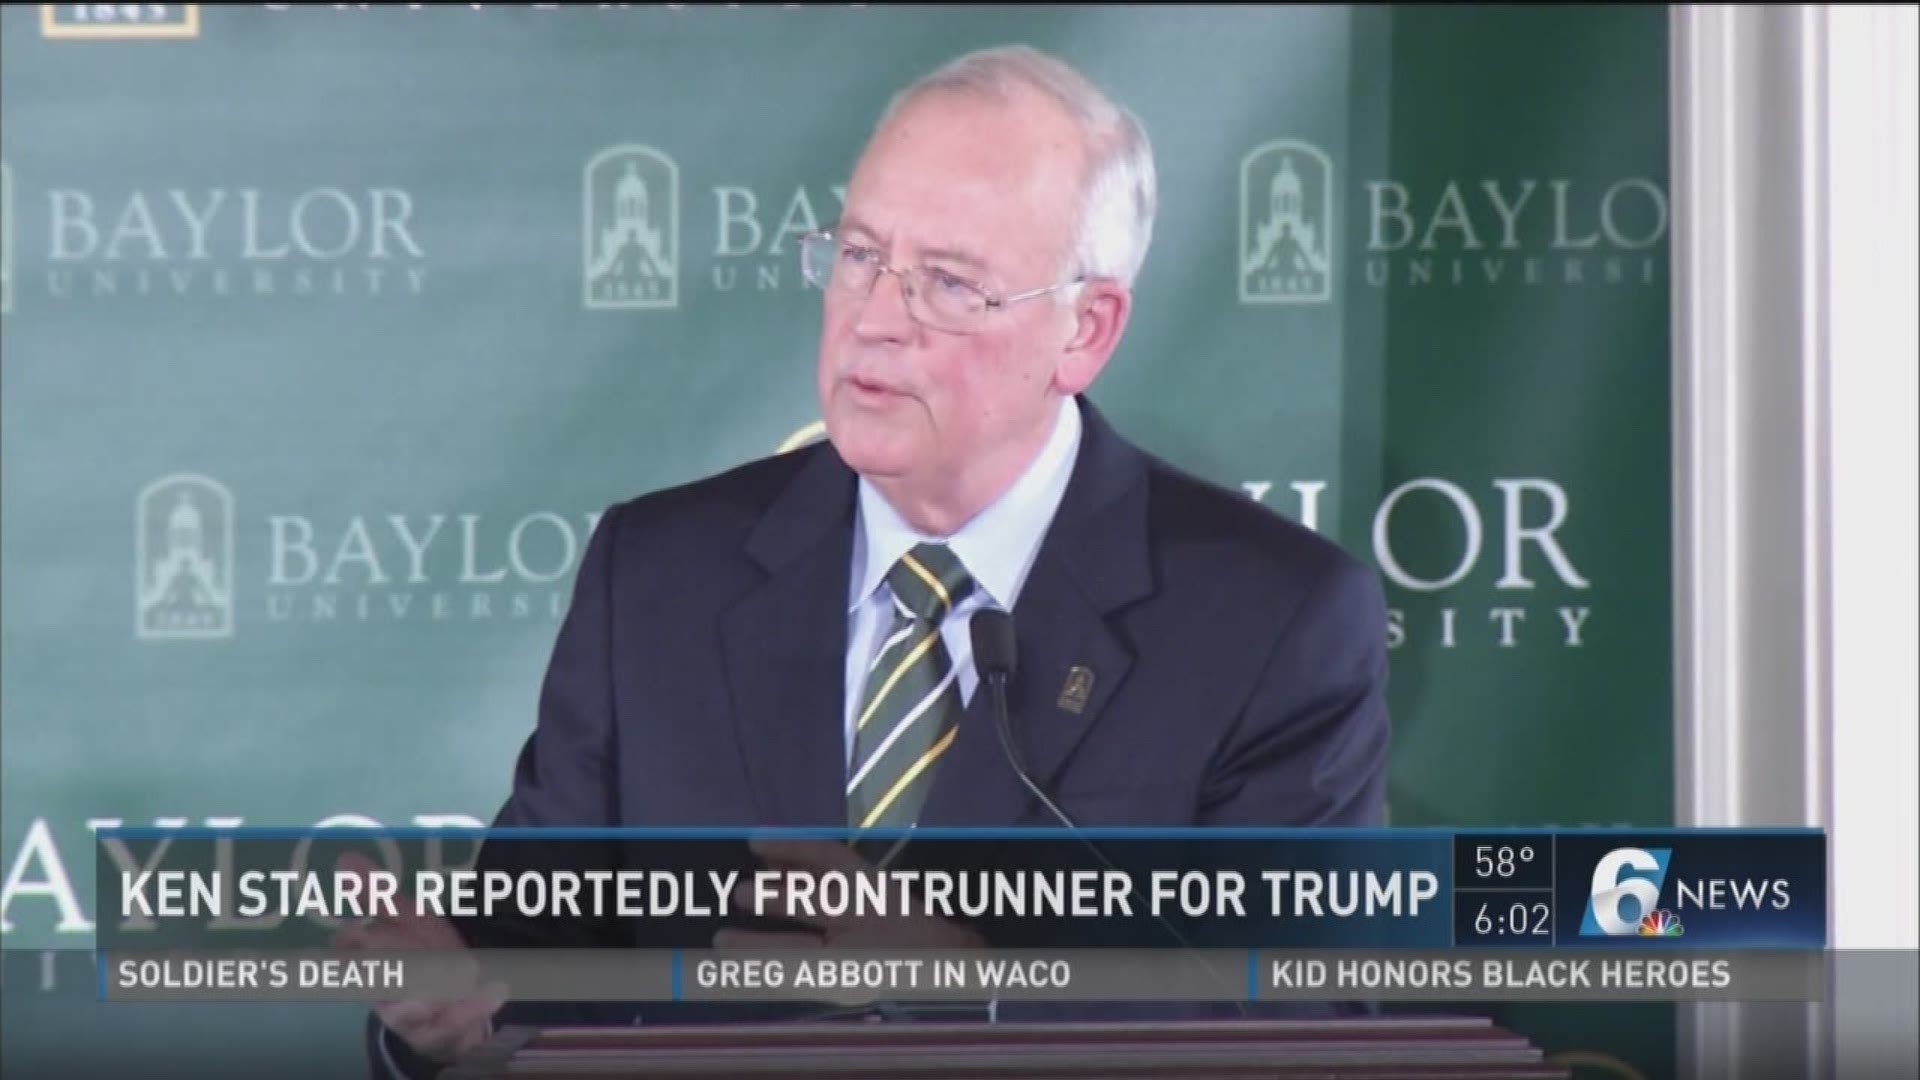 Former Baylor President and Chancellor Ken Starr is reportedly a front runner for President Trump's administration. 